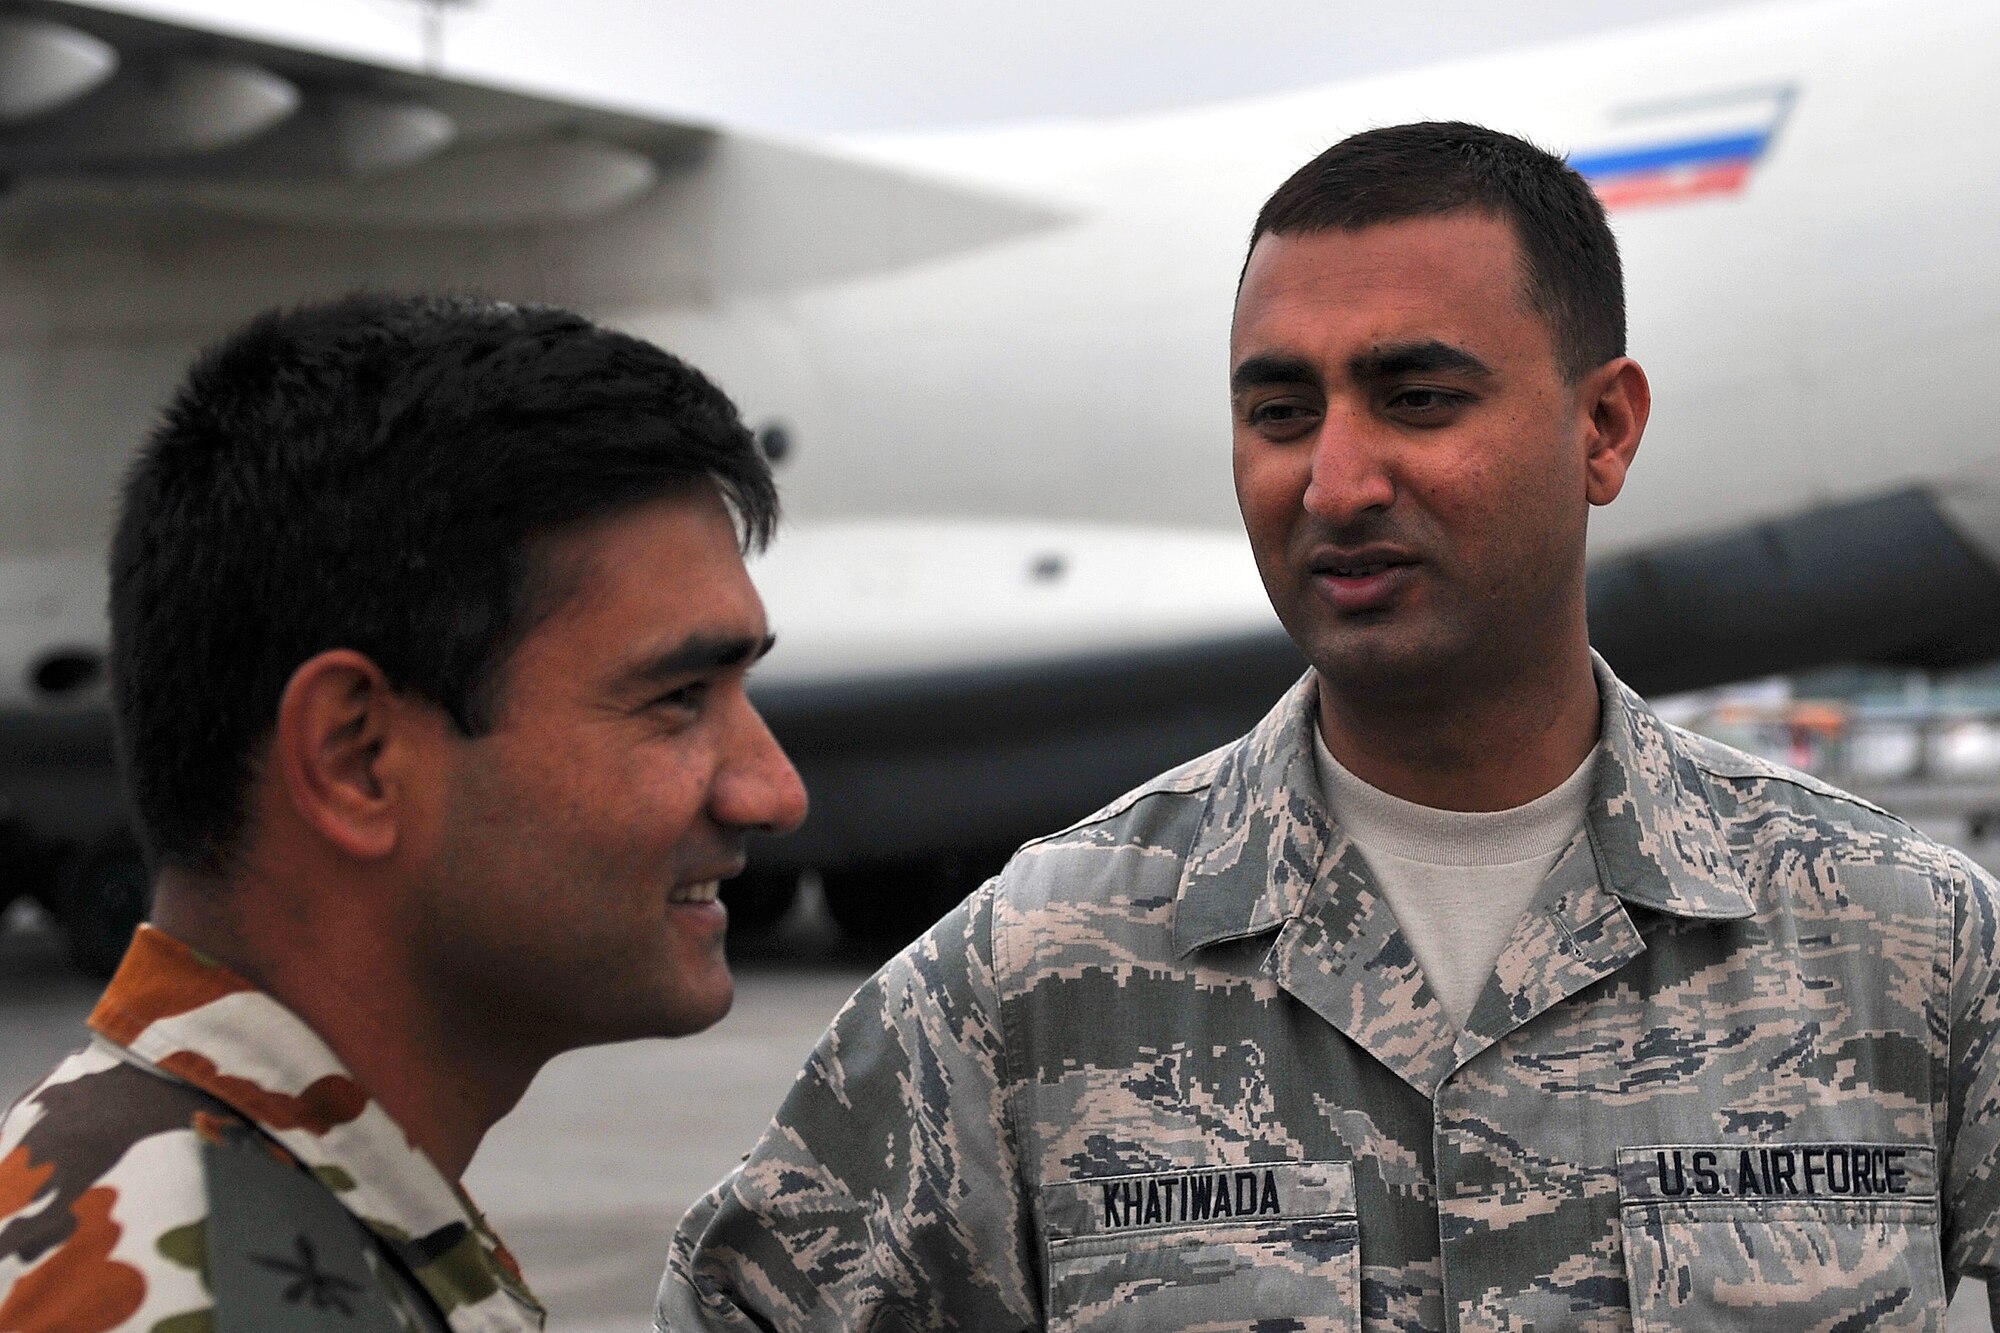 U.S. Air Force Senior Airman Manoj Khatiwada (right), 21st Medical Operations Squadron aerospace medical technician, talks with a Nepalese Army soldier, Tribhuvan International Airport in Kathmandu, Nepal, May 7, 2015. Manoj joined a team from the 36th Contingency Response Group to assist U.S. Air Force, U.S. Department of State and U.S. Agency for International Development operations by assisting with communicating with the Nepalese Army as they process relief supplies following a magnitude 7.8 earthquake that struck the region April 25, 2015. (U.S. Air Force photo by Staff Sgt. Melissa White/Released)